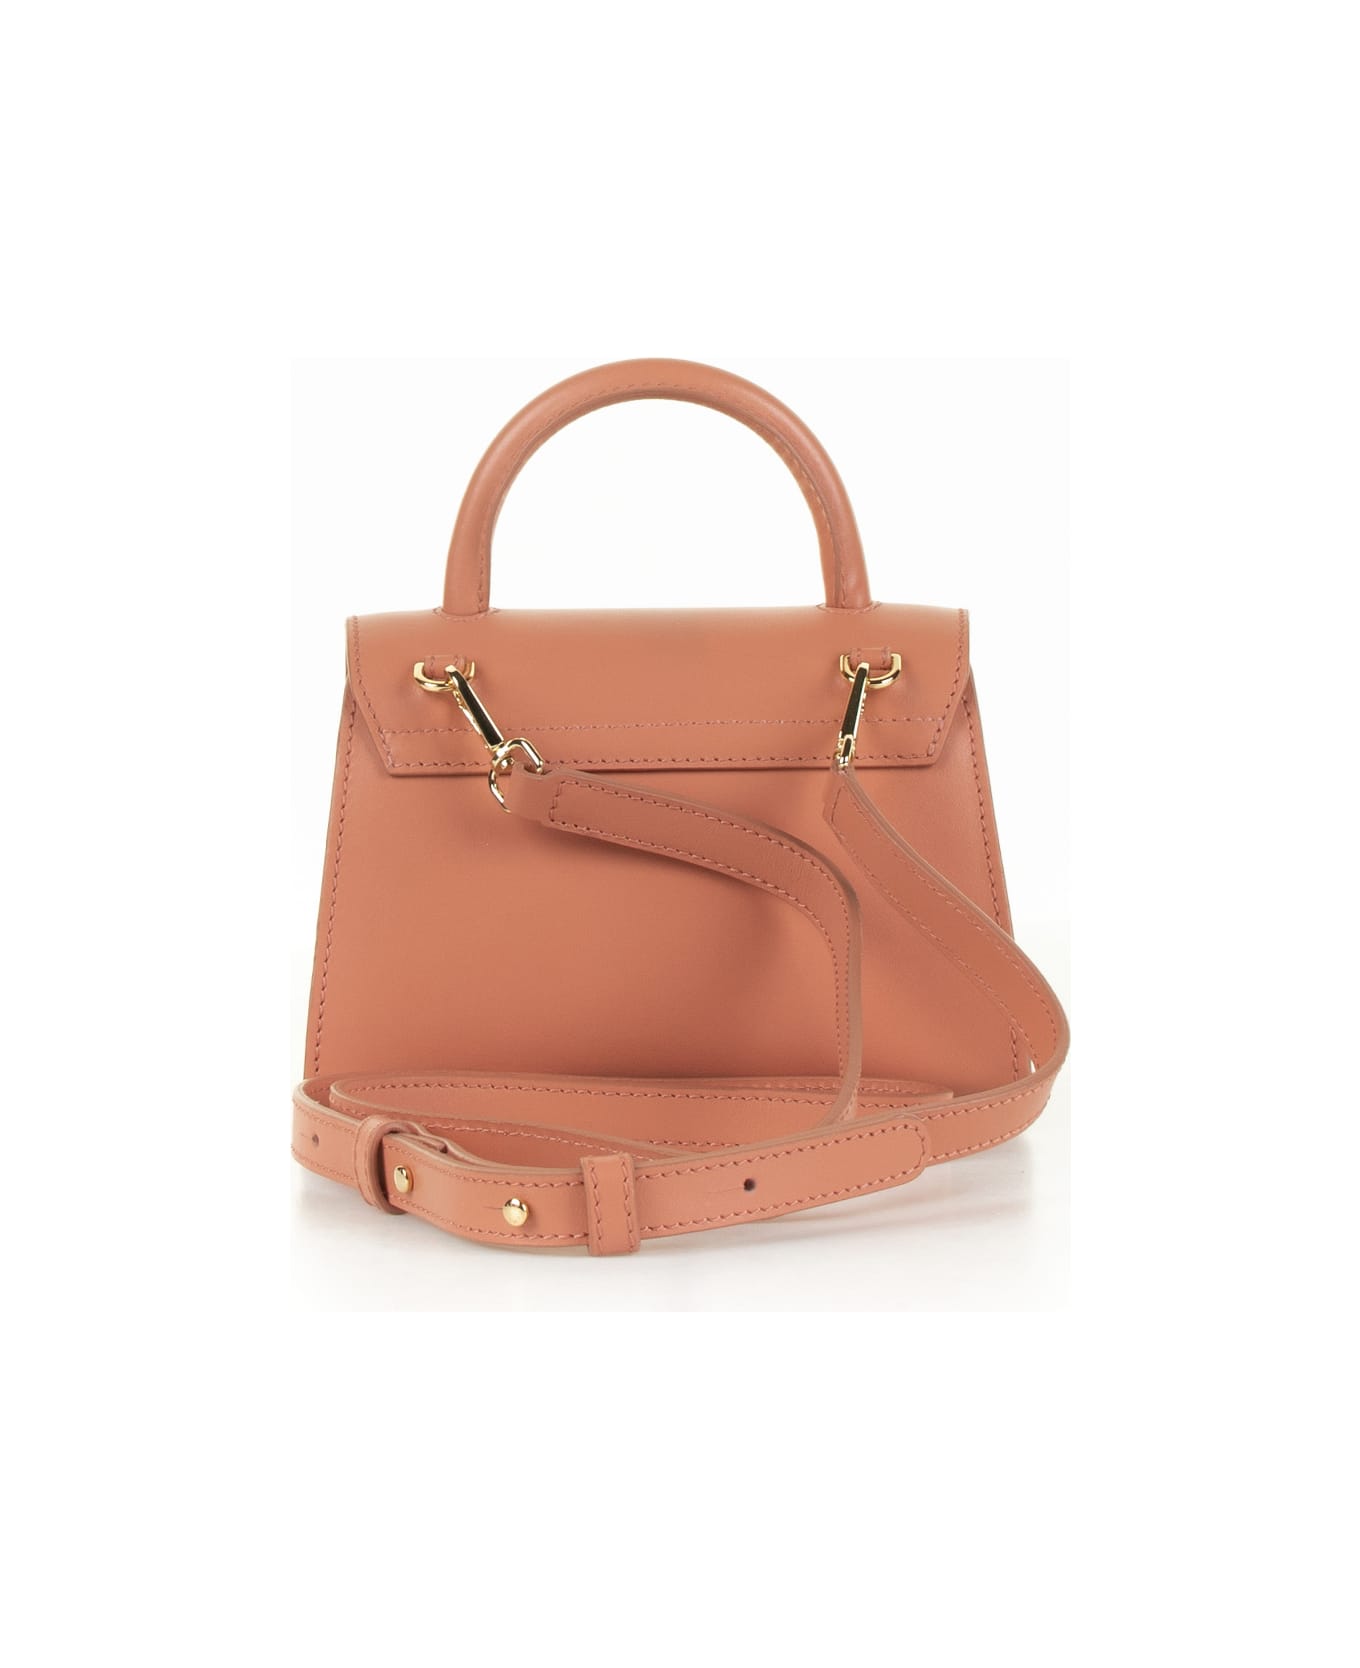 Demellier Montreal Nano Leather Bag With Shoulder Strap - CORAL